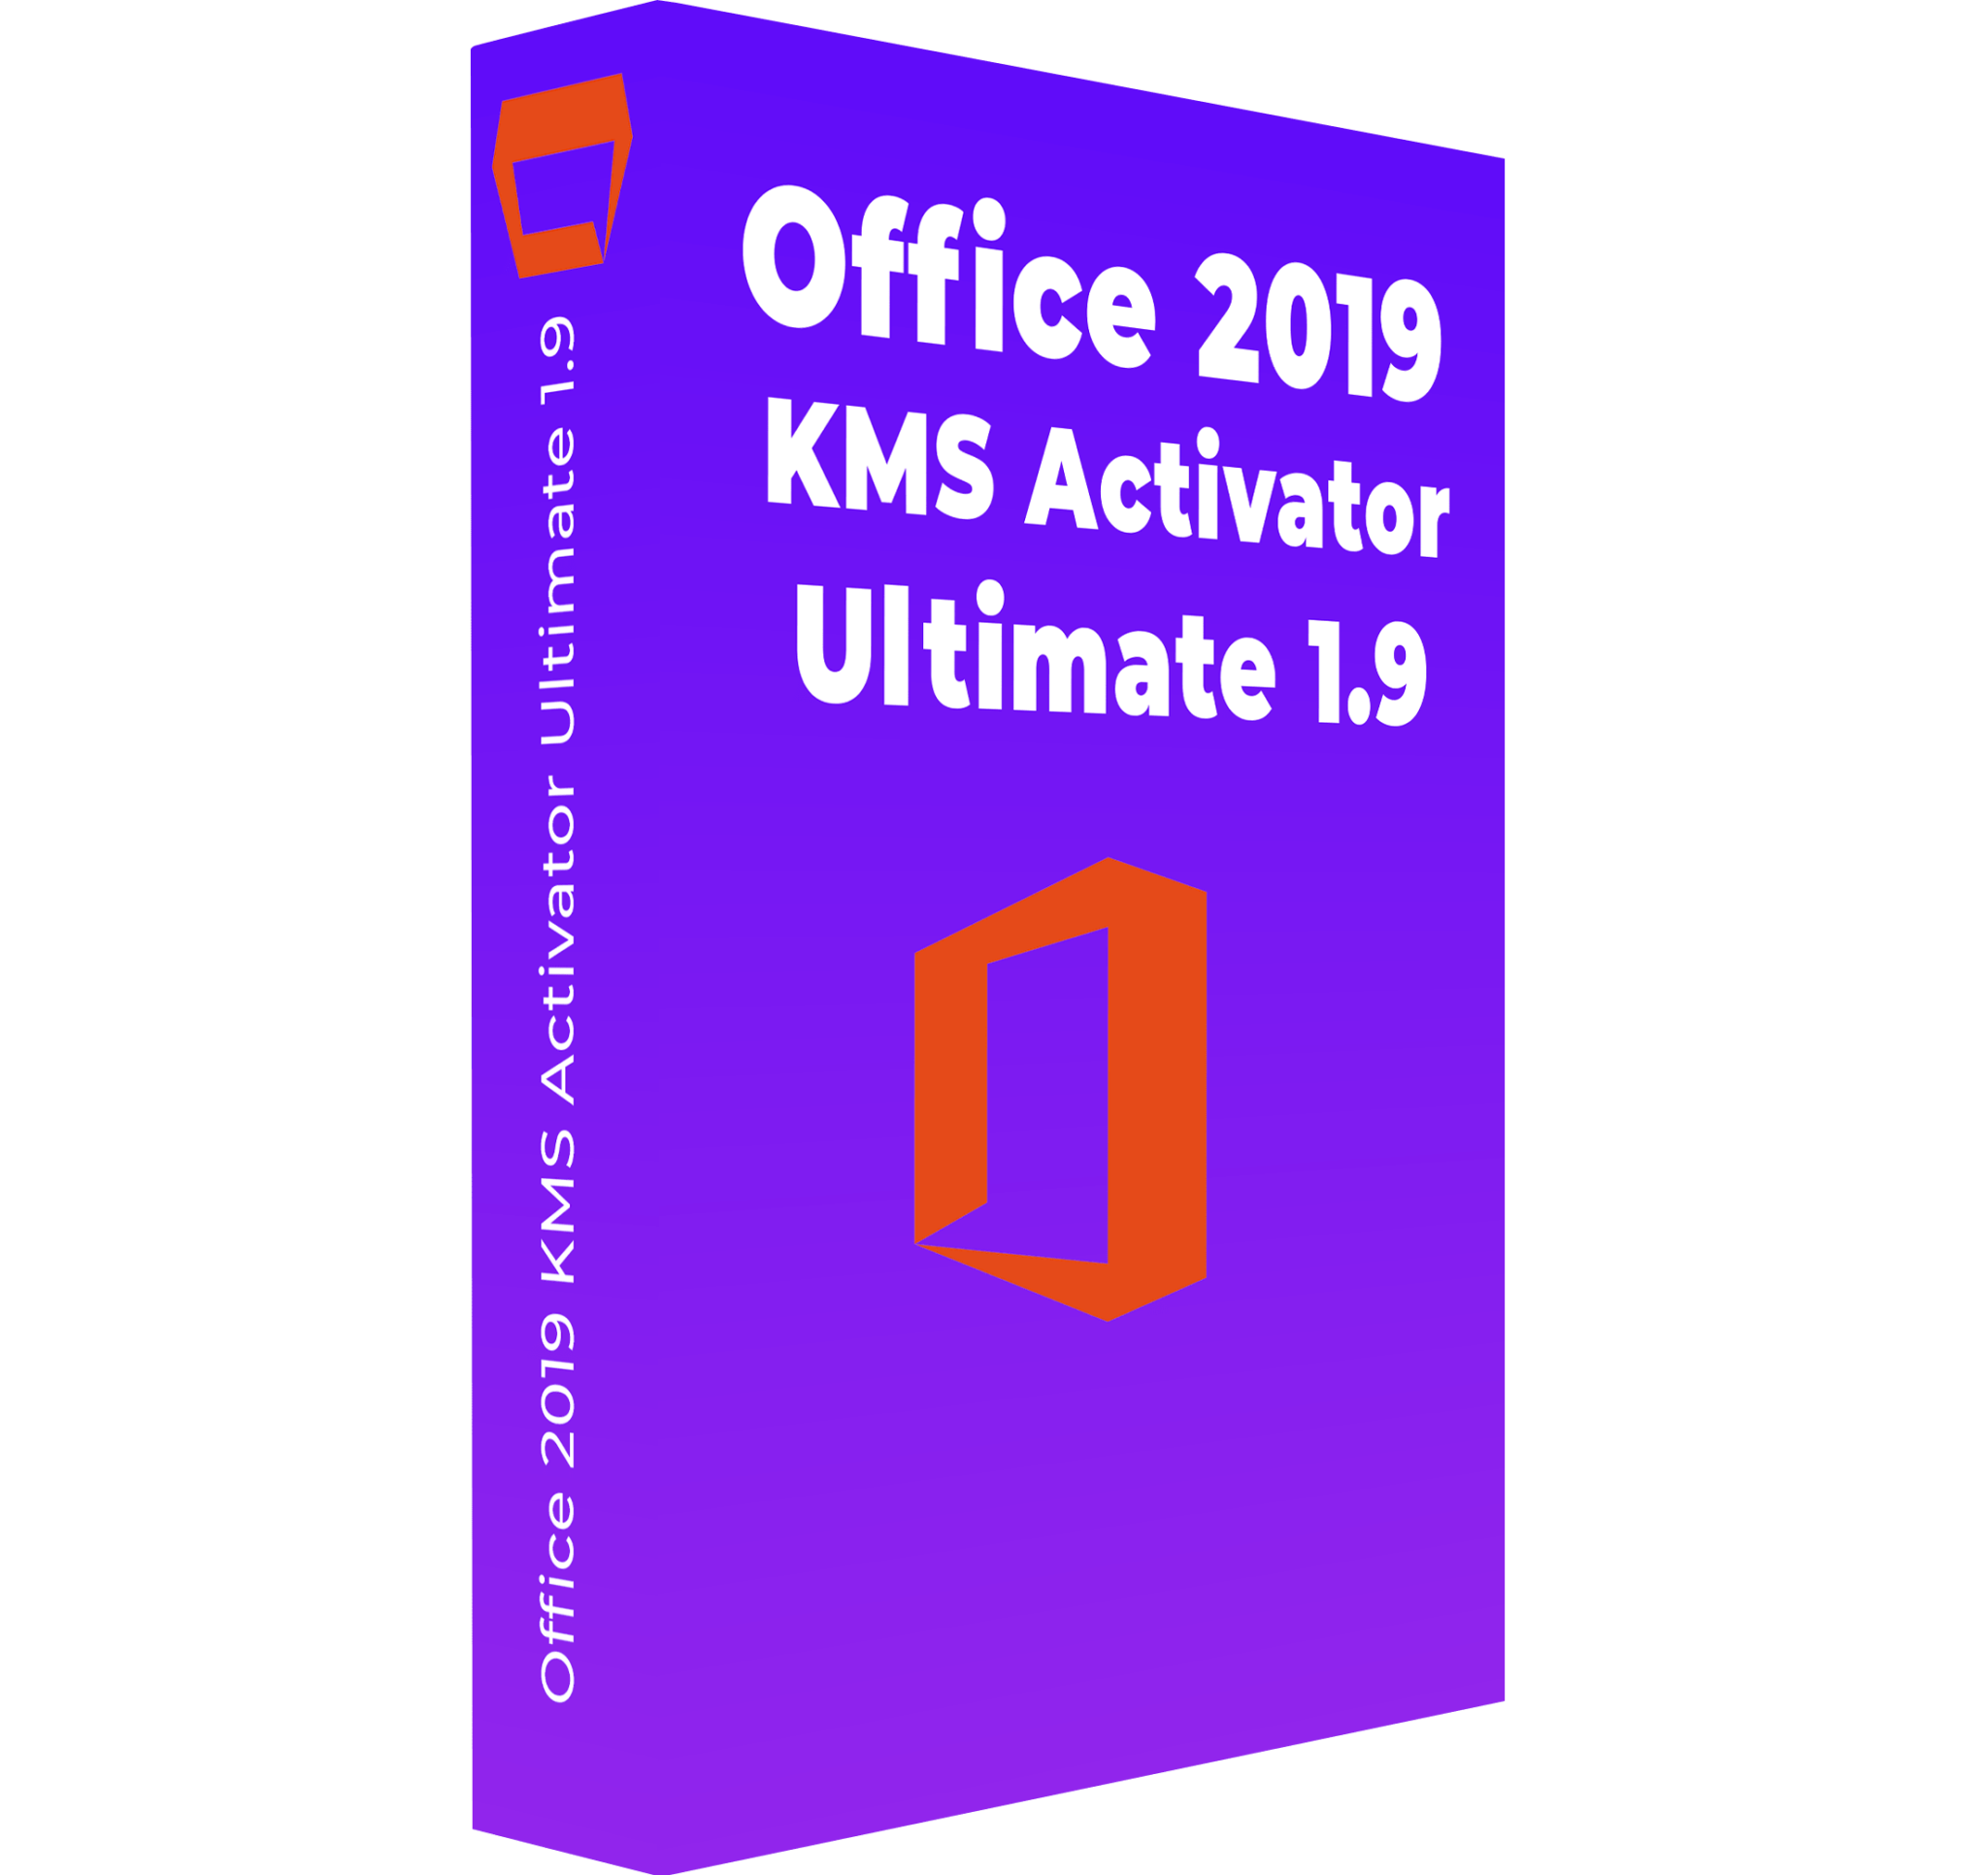 how to activate ms office 2019 using kms